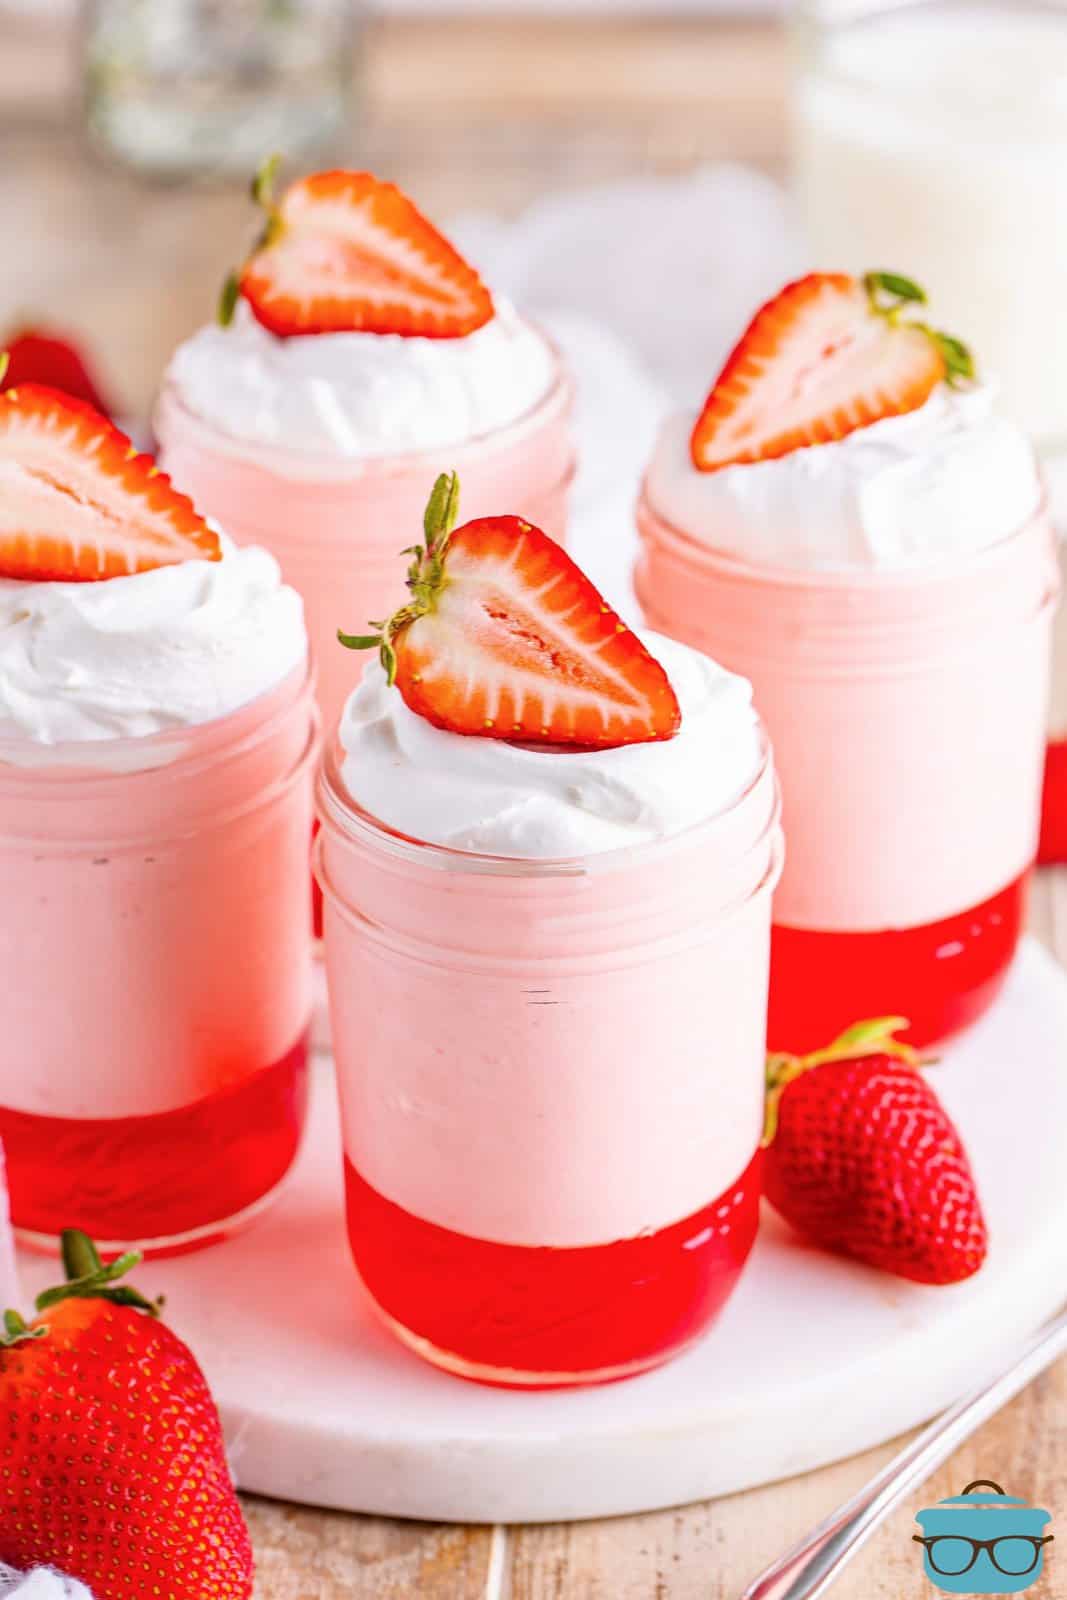 Four jars of strawberry Jell-O parfait with strawberries on top.